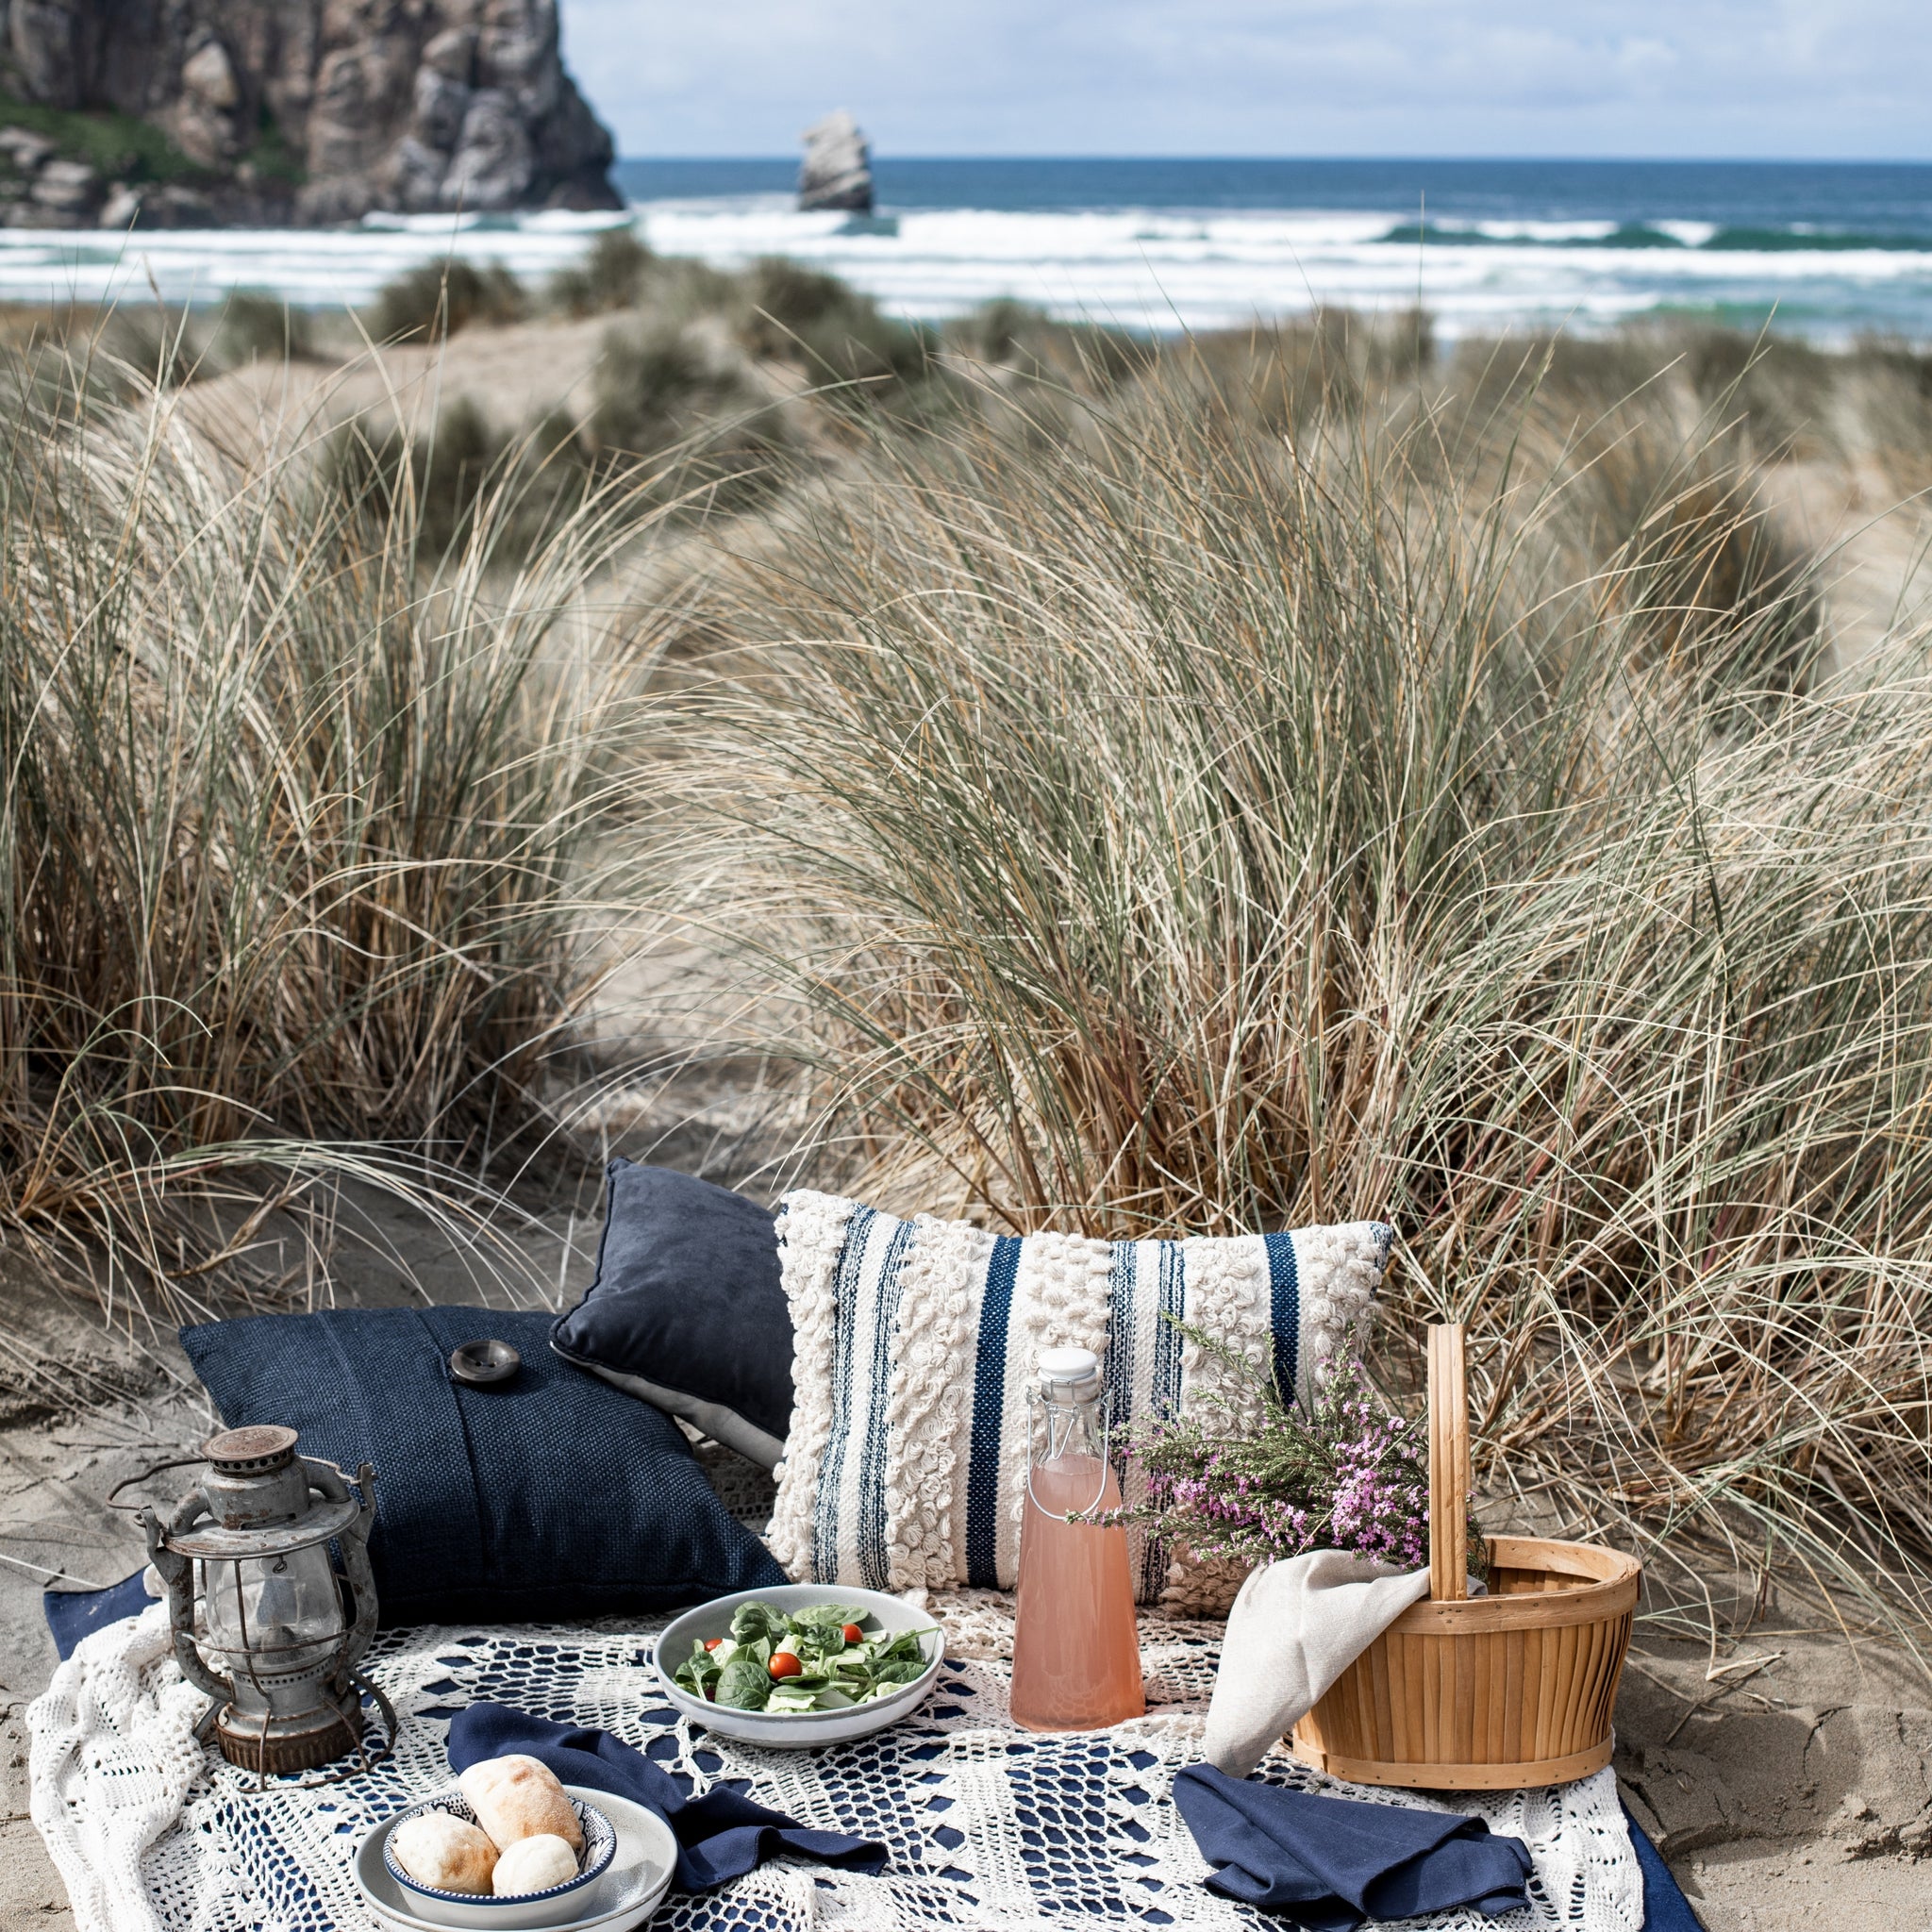 A picnic blanket and food set out in the sand dunes overlooking the sea